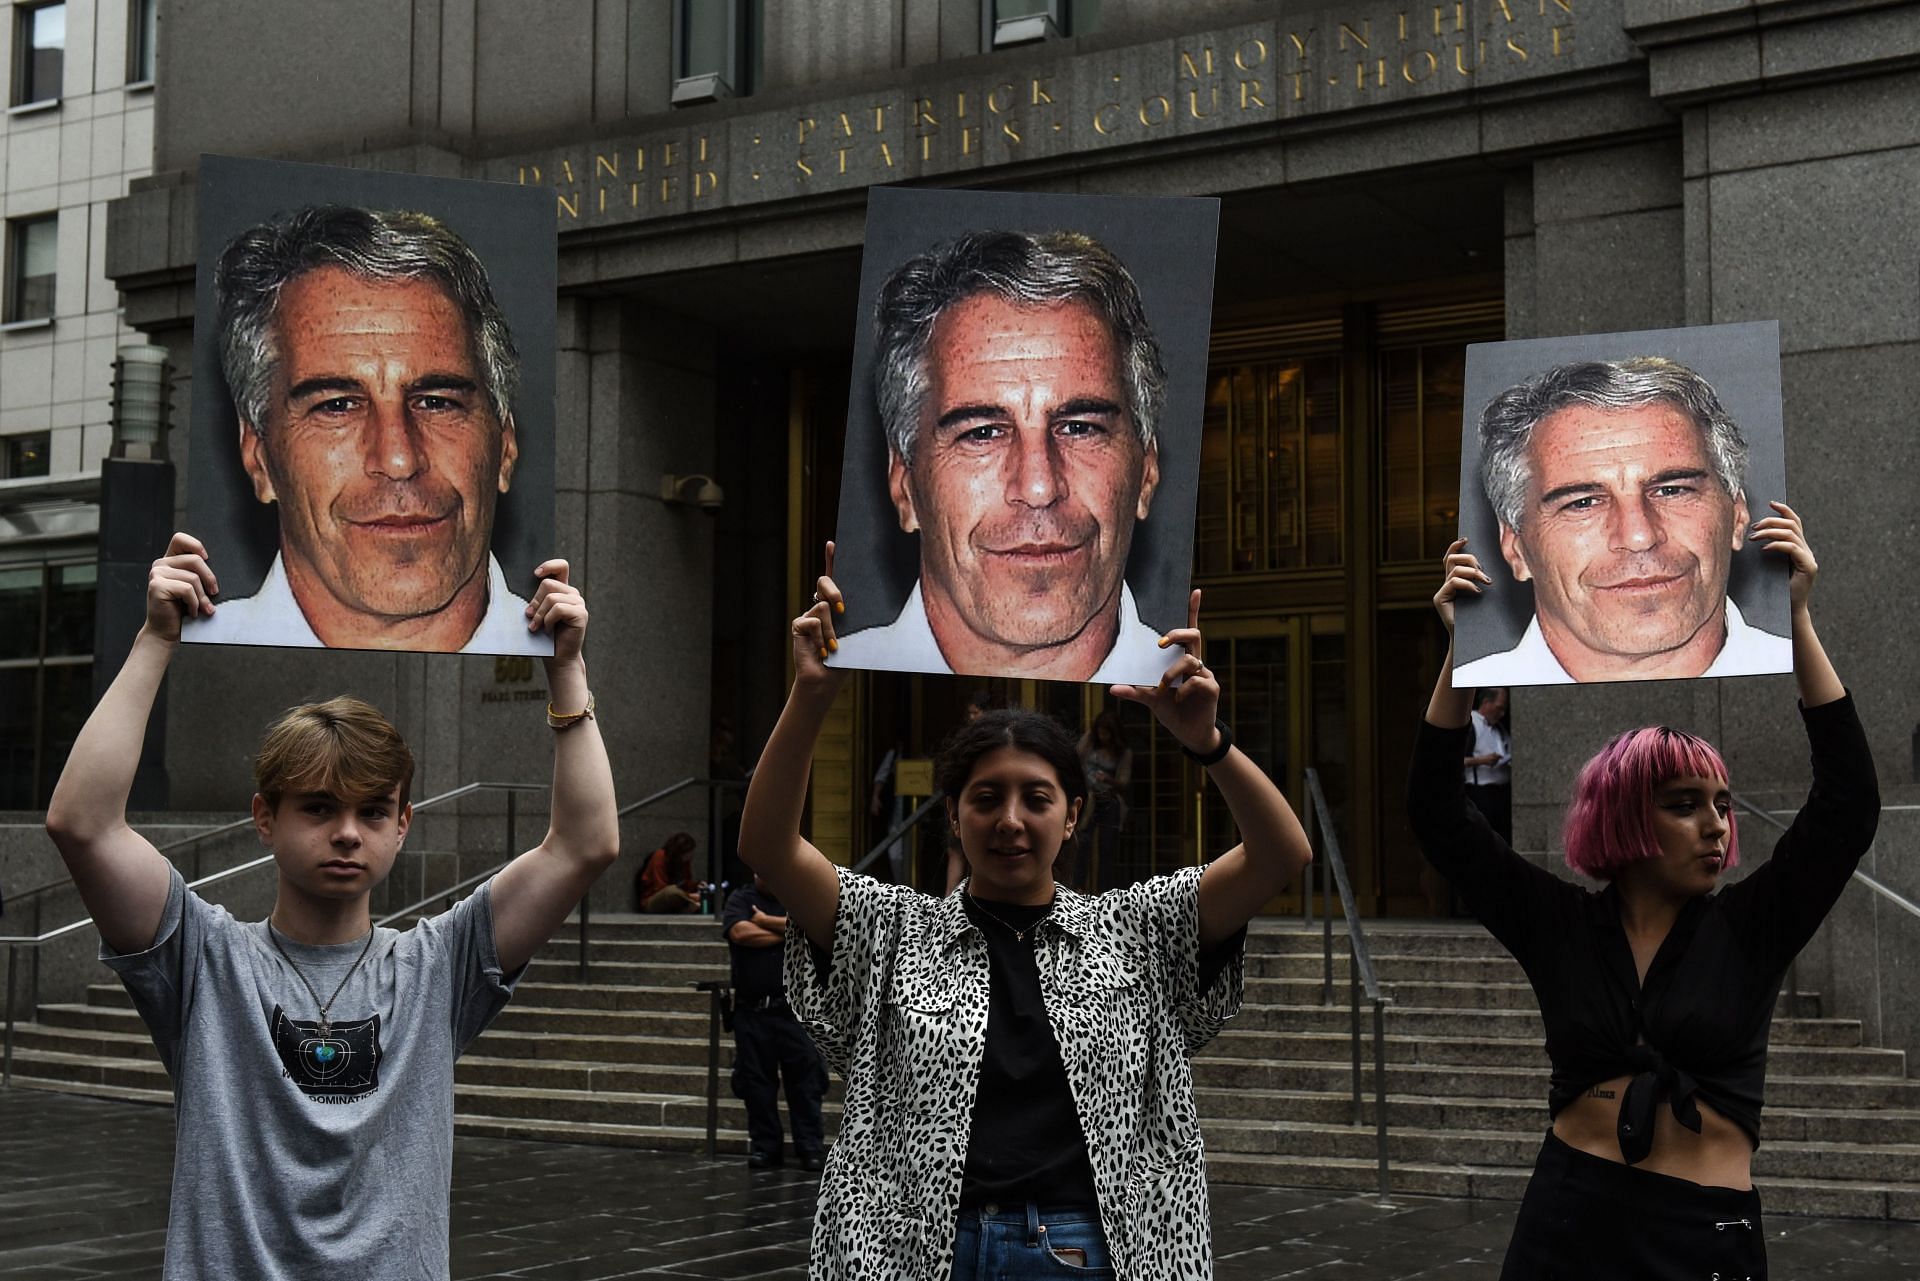 Jeffrey Epstein Appears In Manhattan Federal Court On S*x Trafficking Charges (Image by Getty Images)